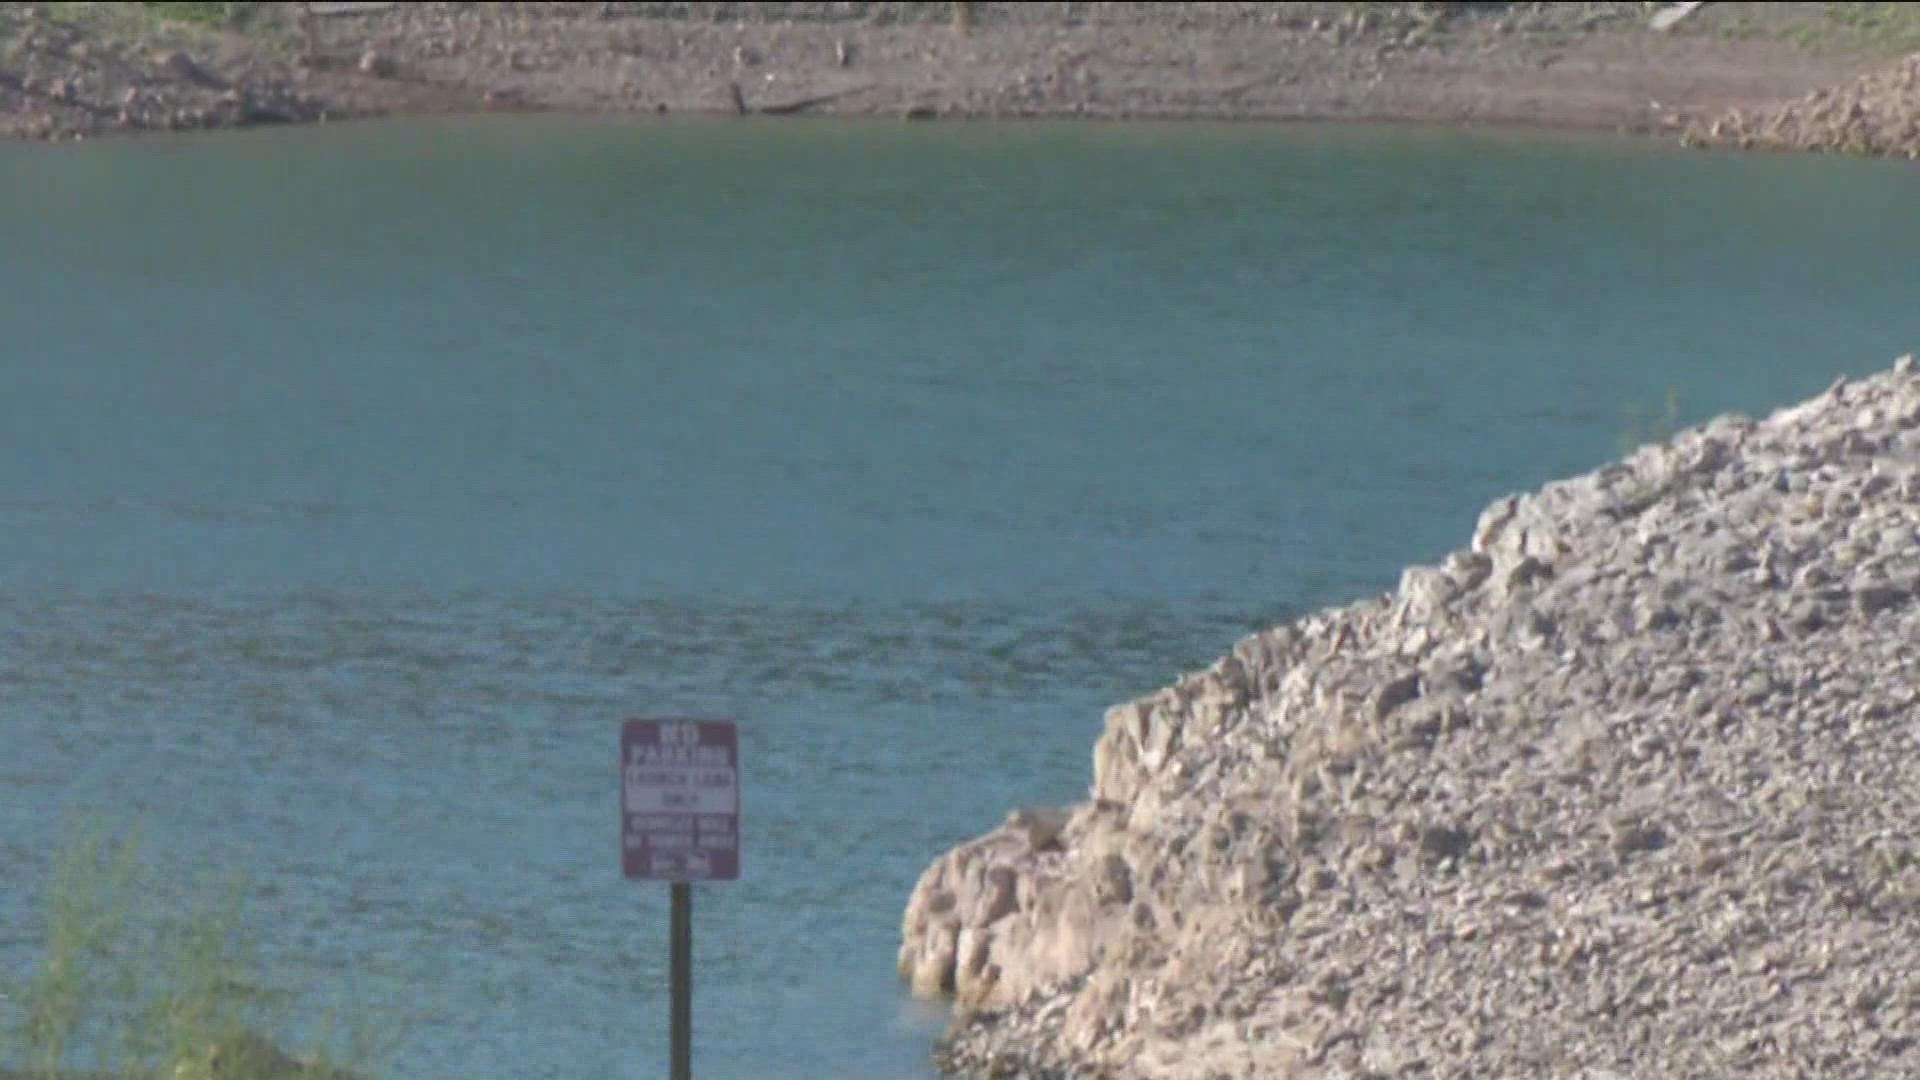 MCSO deputies say the man went under the water and did not resurface around 2 p.m. near the Humbug Cove area.